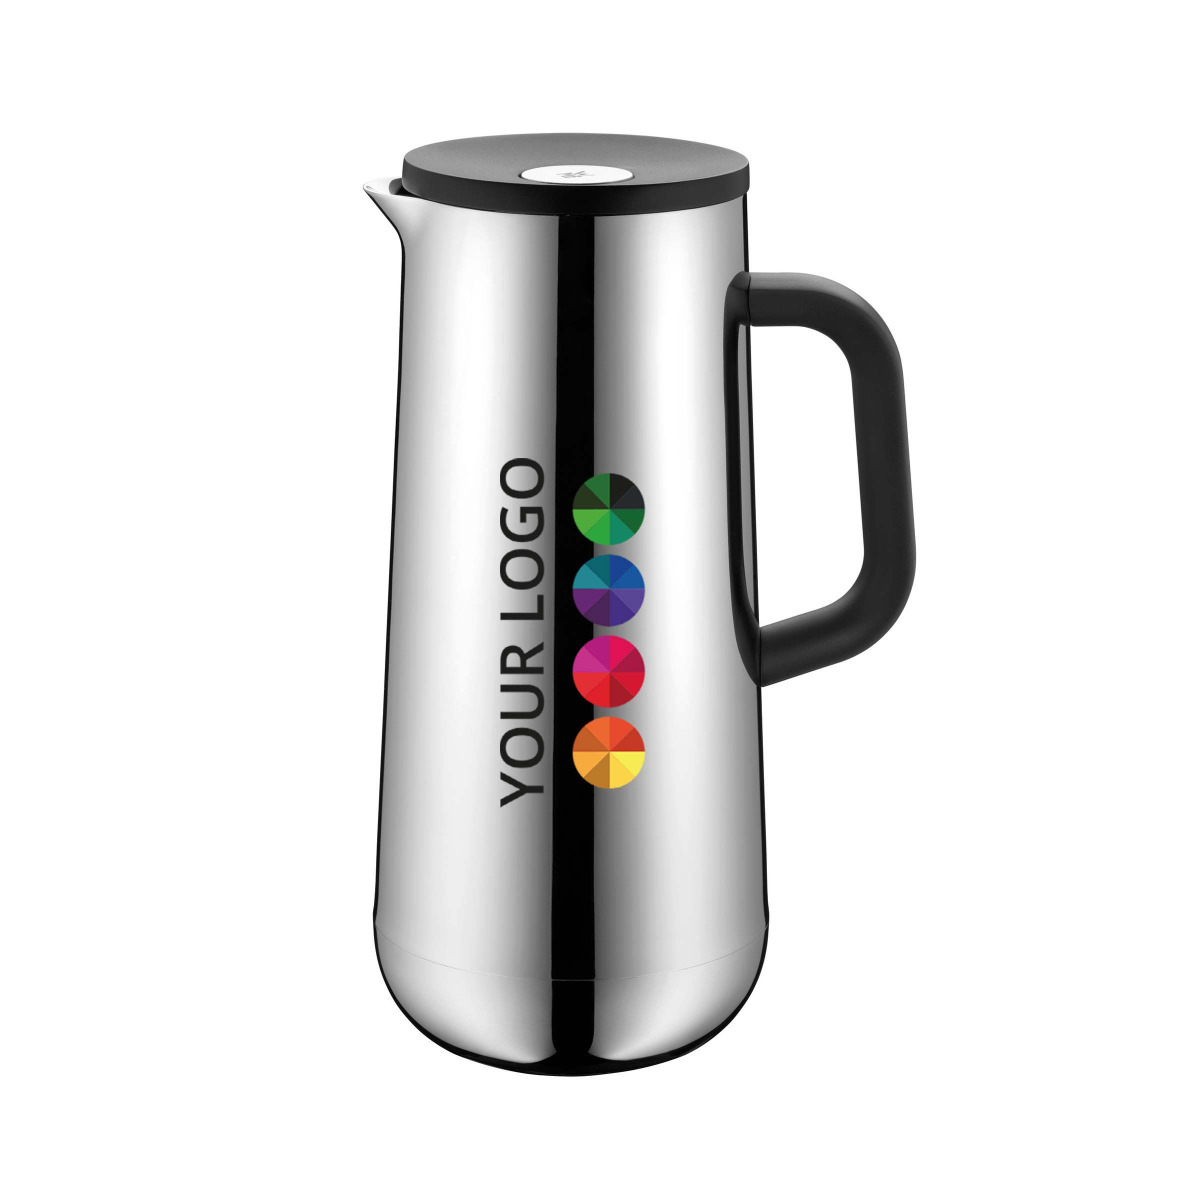 WMF Insulation Coffee Jug 1L Impulse - Personalisation with a full colour print, engraving and sleeve